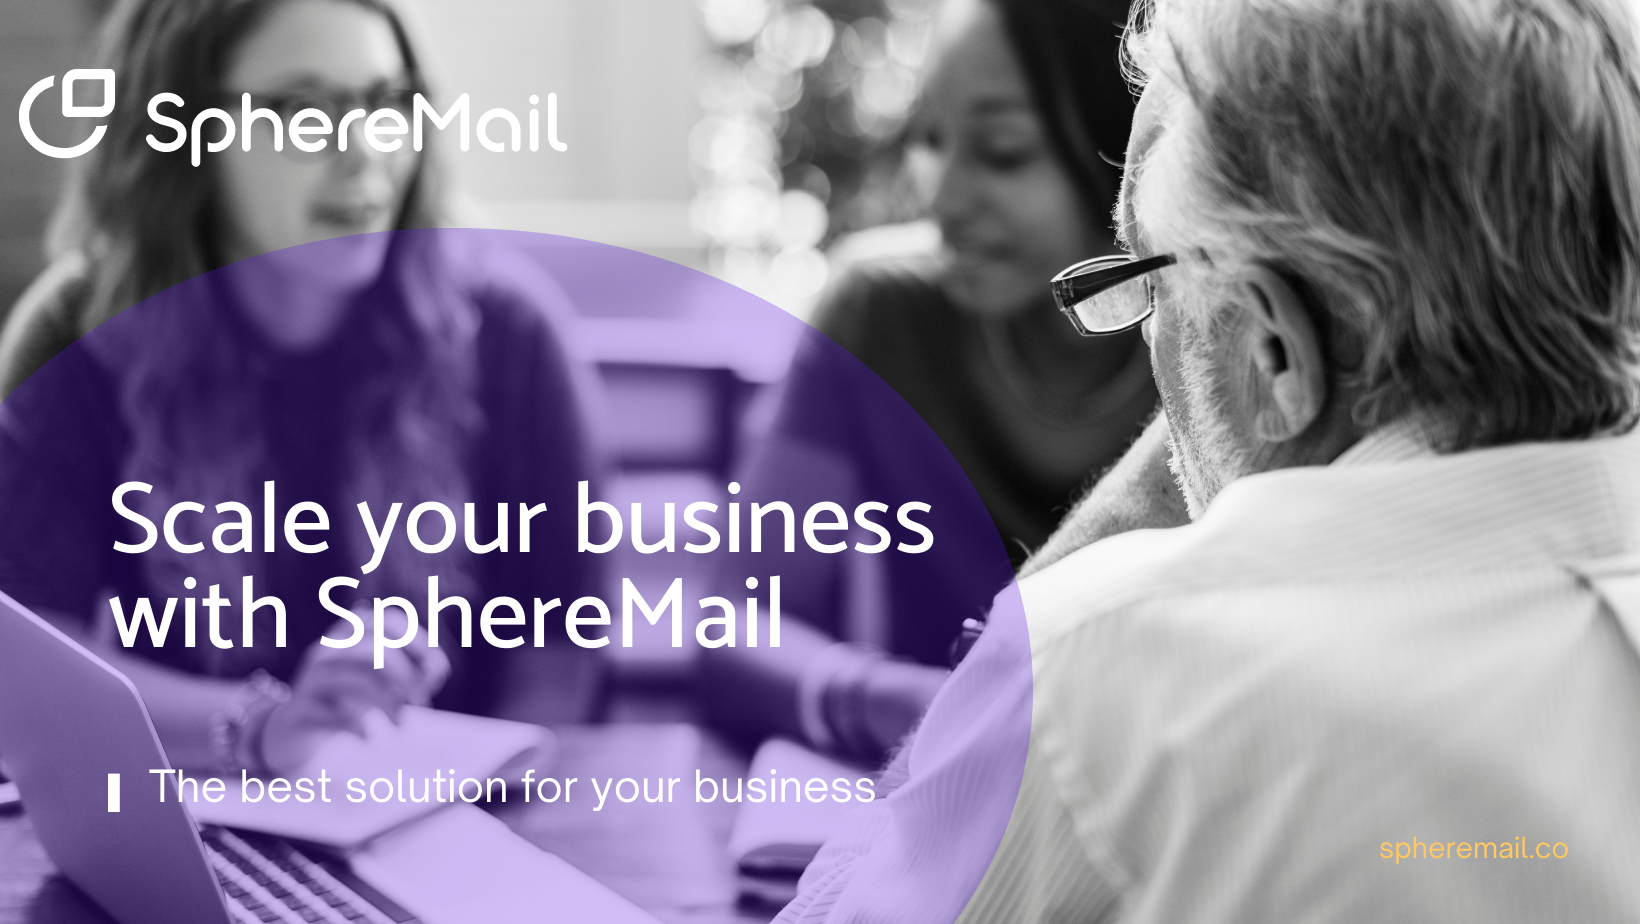 Scall your business with SphereMail